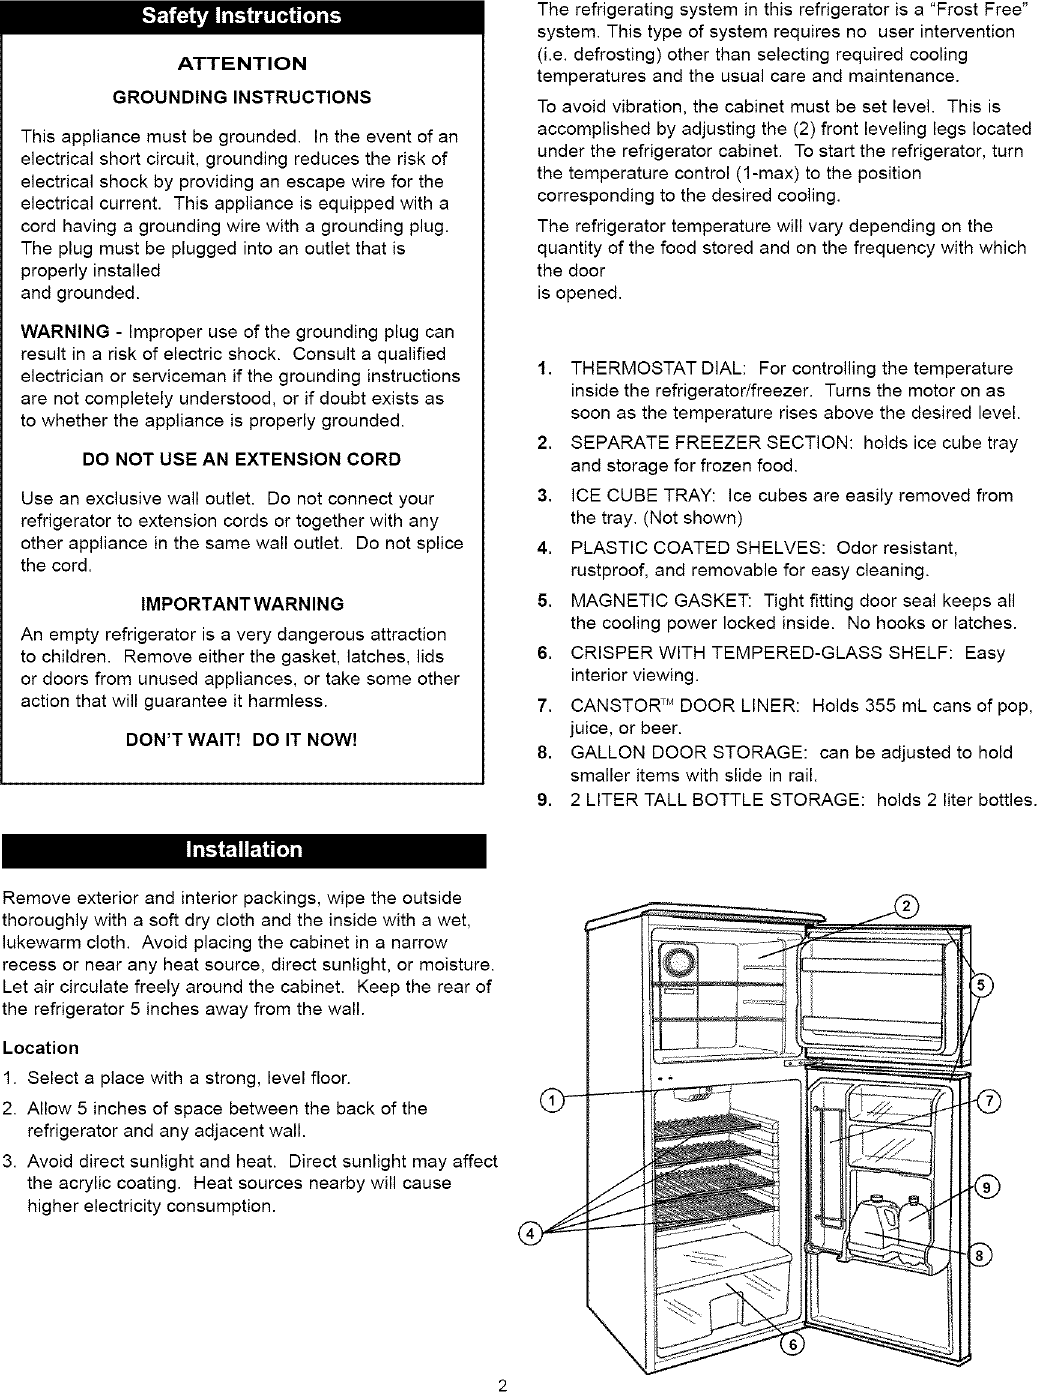 Page 3 of 7 - Danby DFF9100W User Manual  REFRIGERATOR - Manuals And Guides L0712176